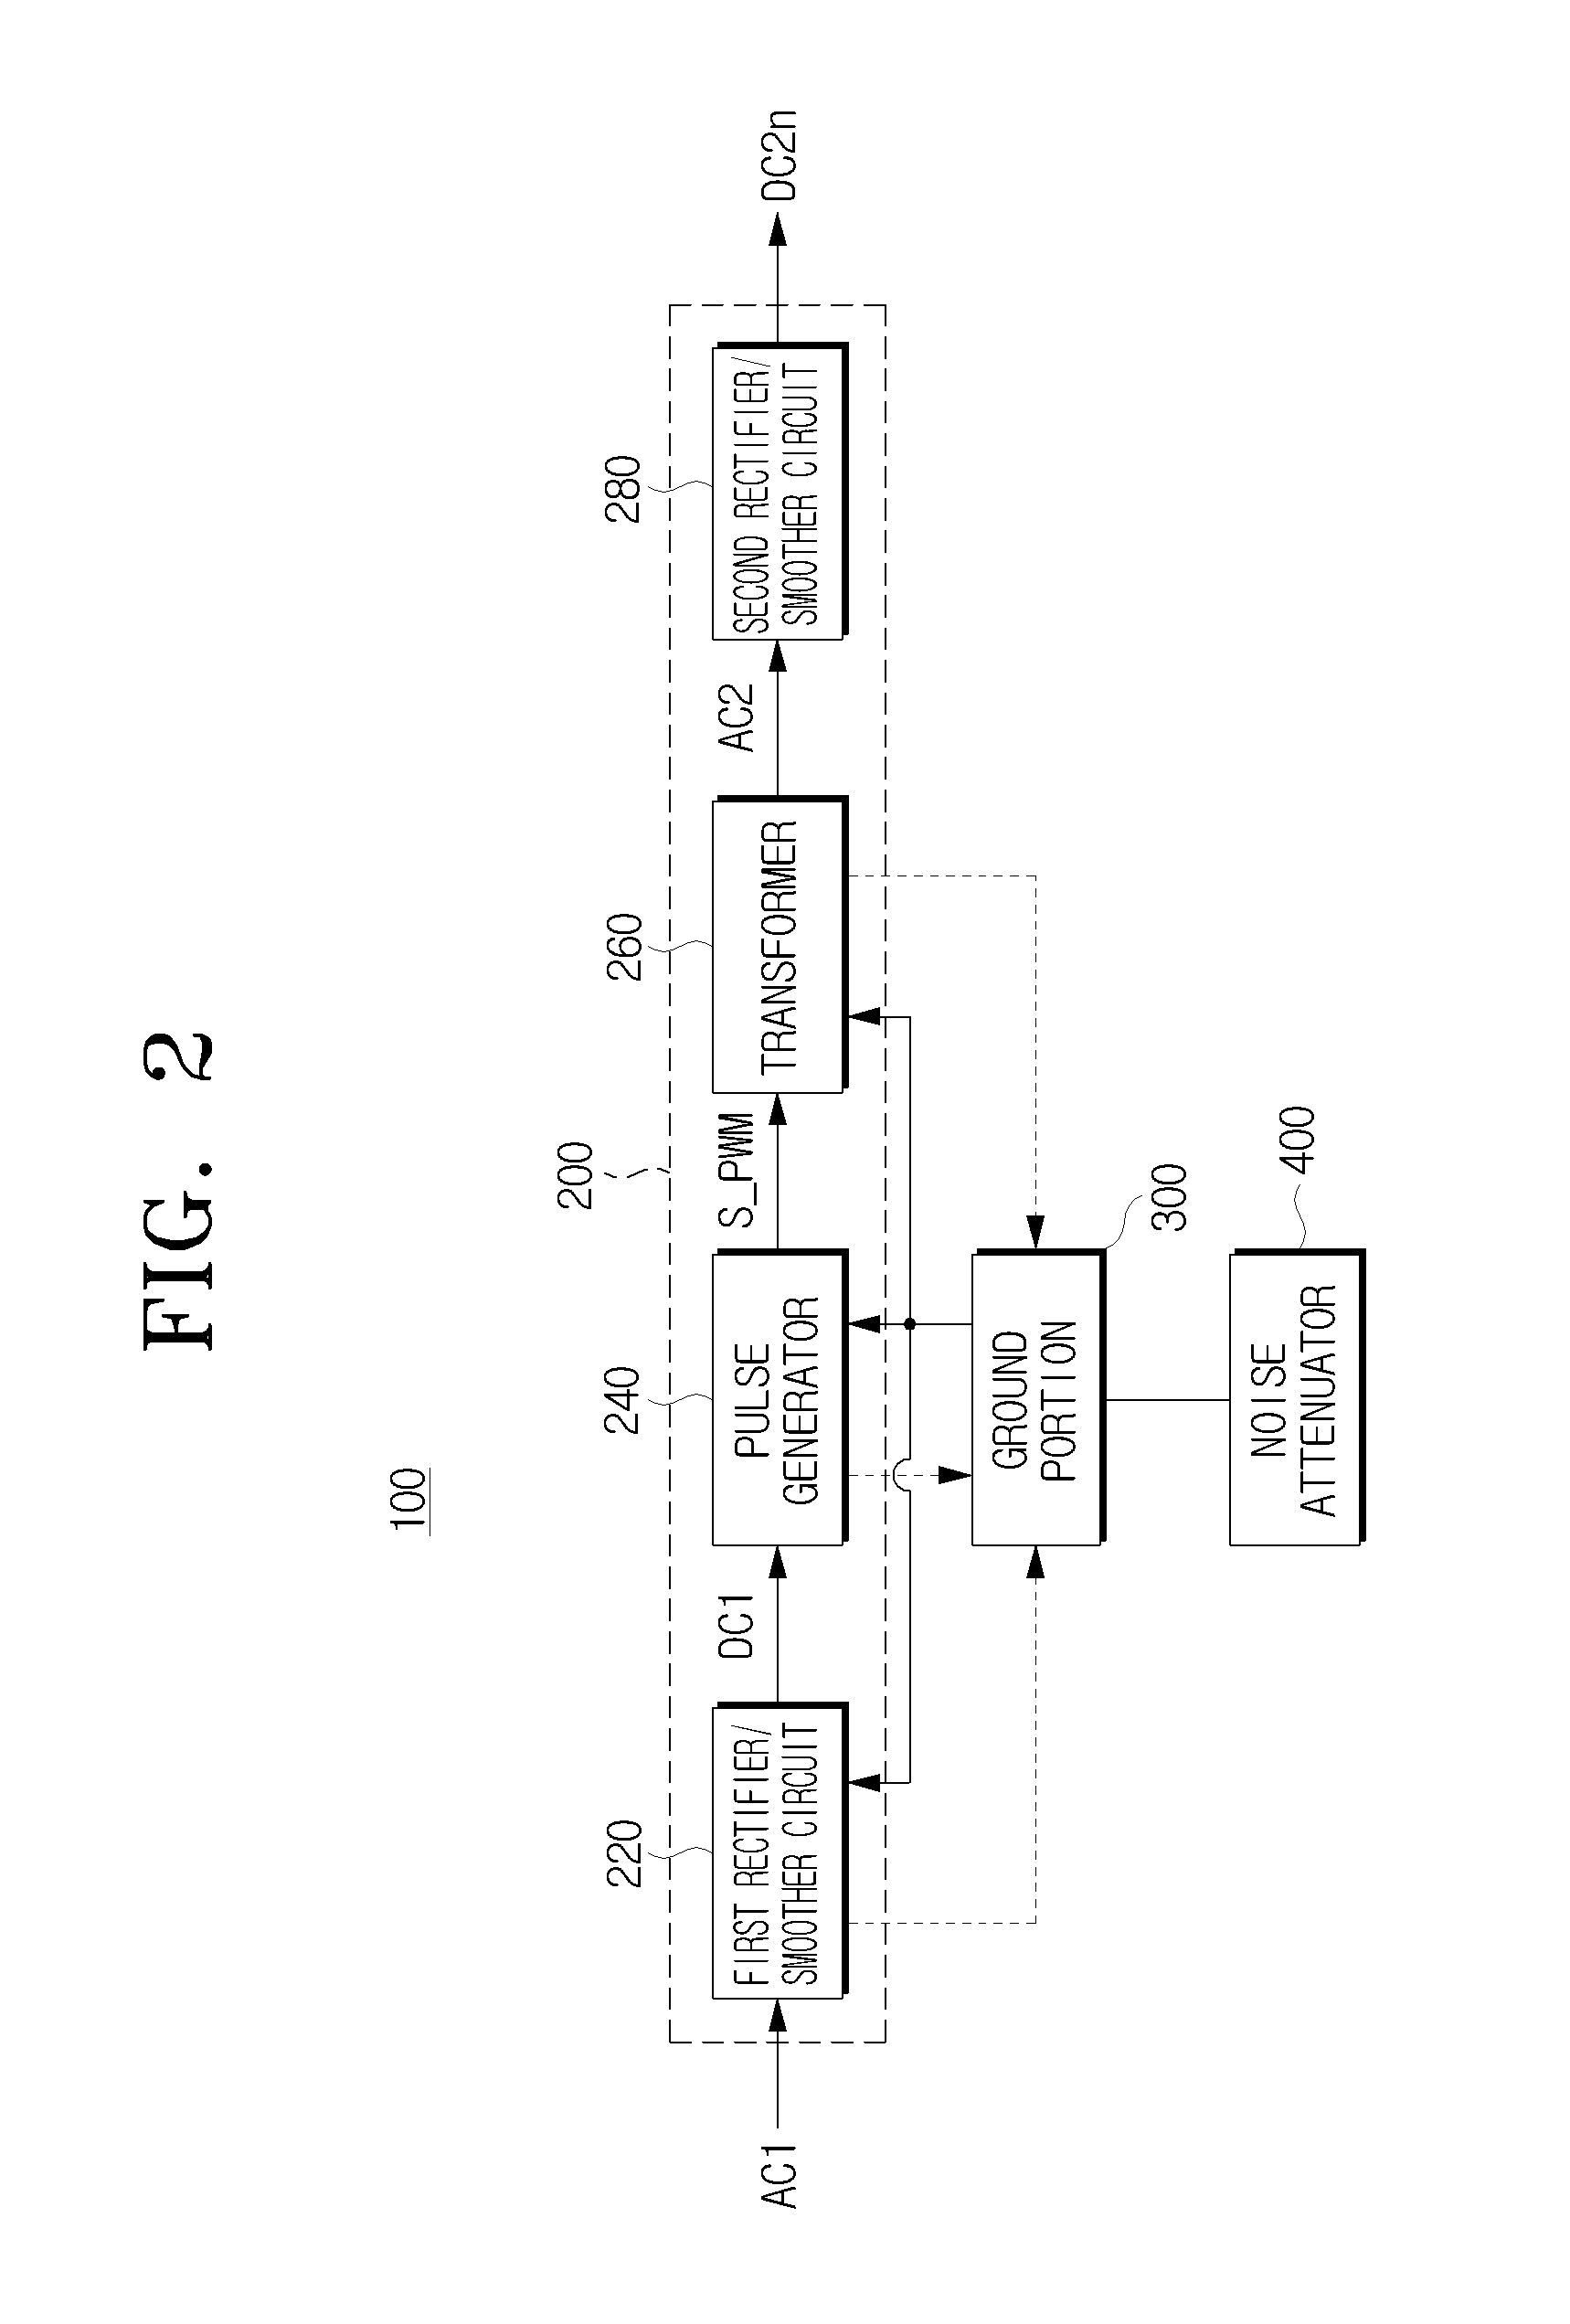 Power supply apparatus for attenuating noise